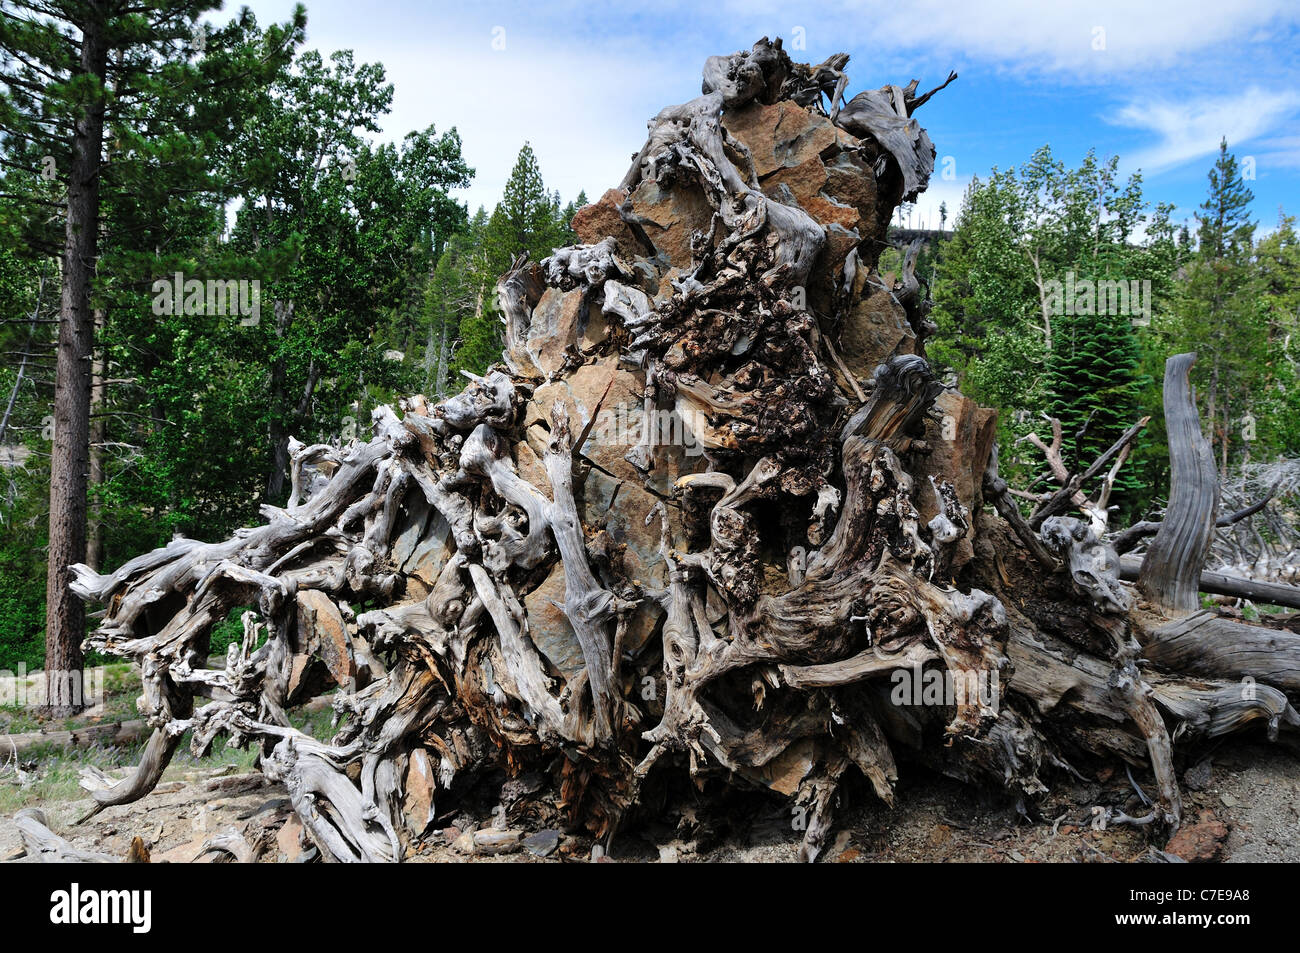 The root system of a big uprooted tree. Devils' Postpile National Monument. California, USA. Stock Photo